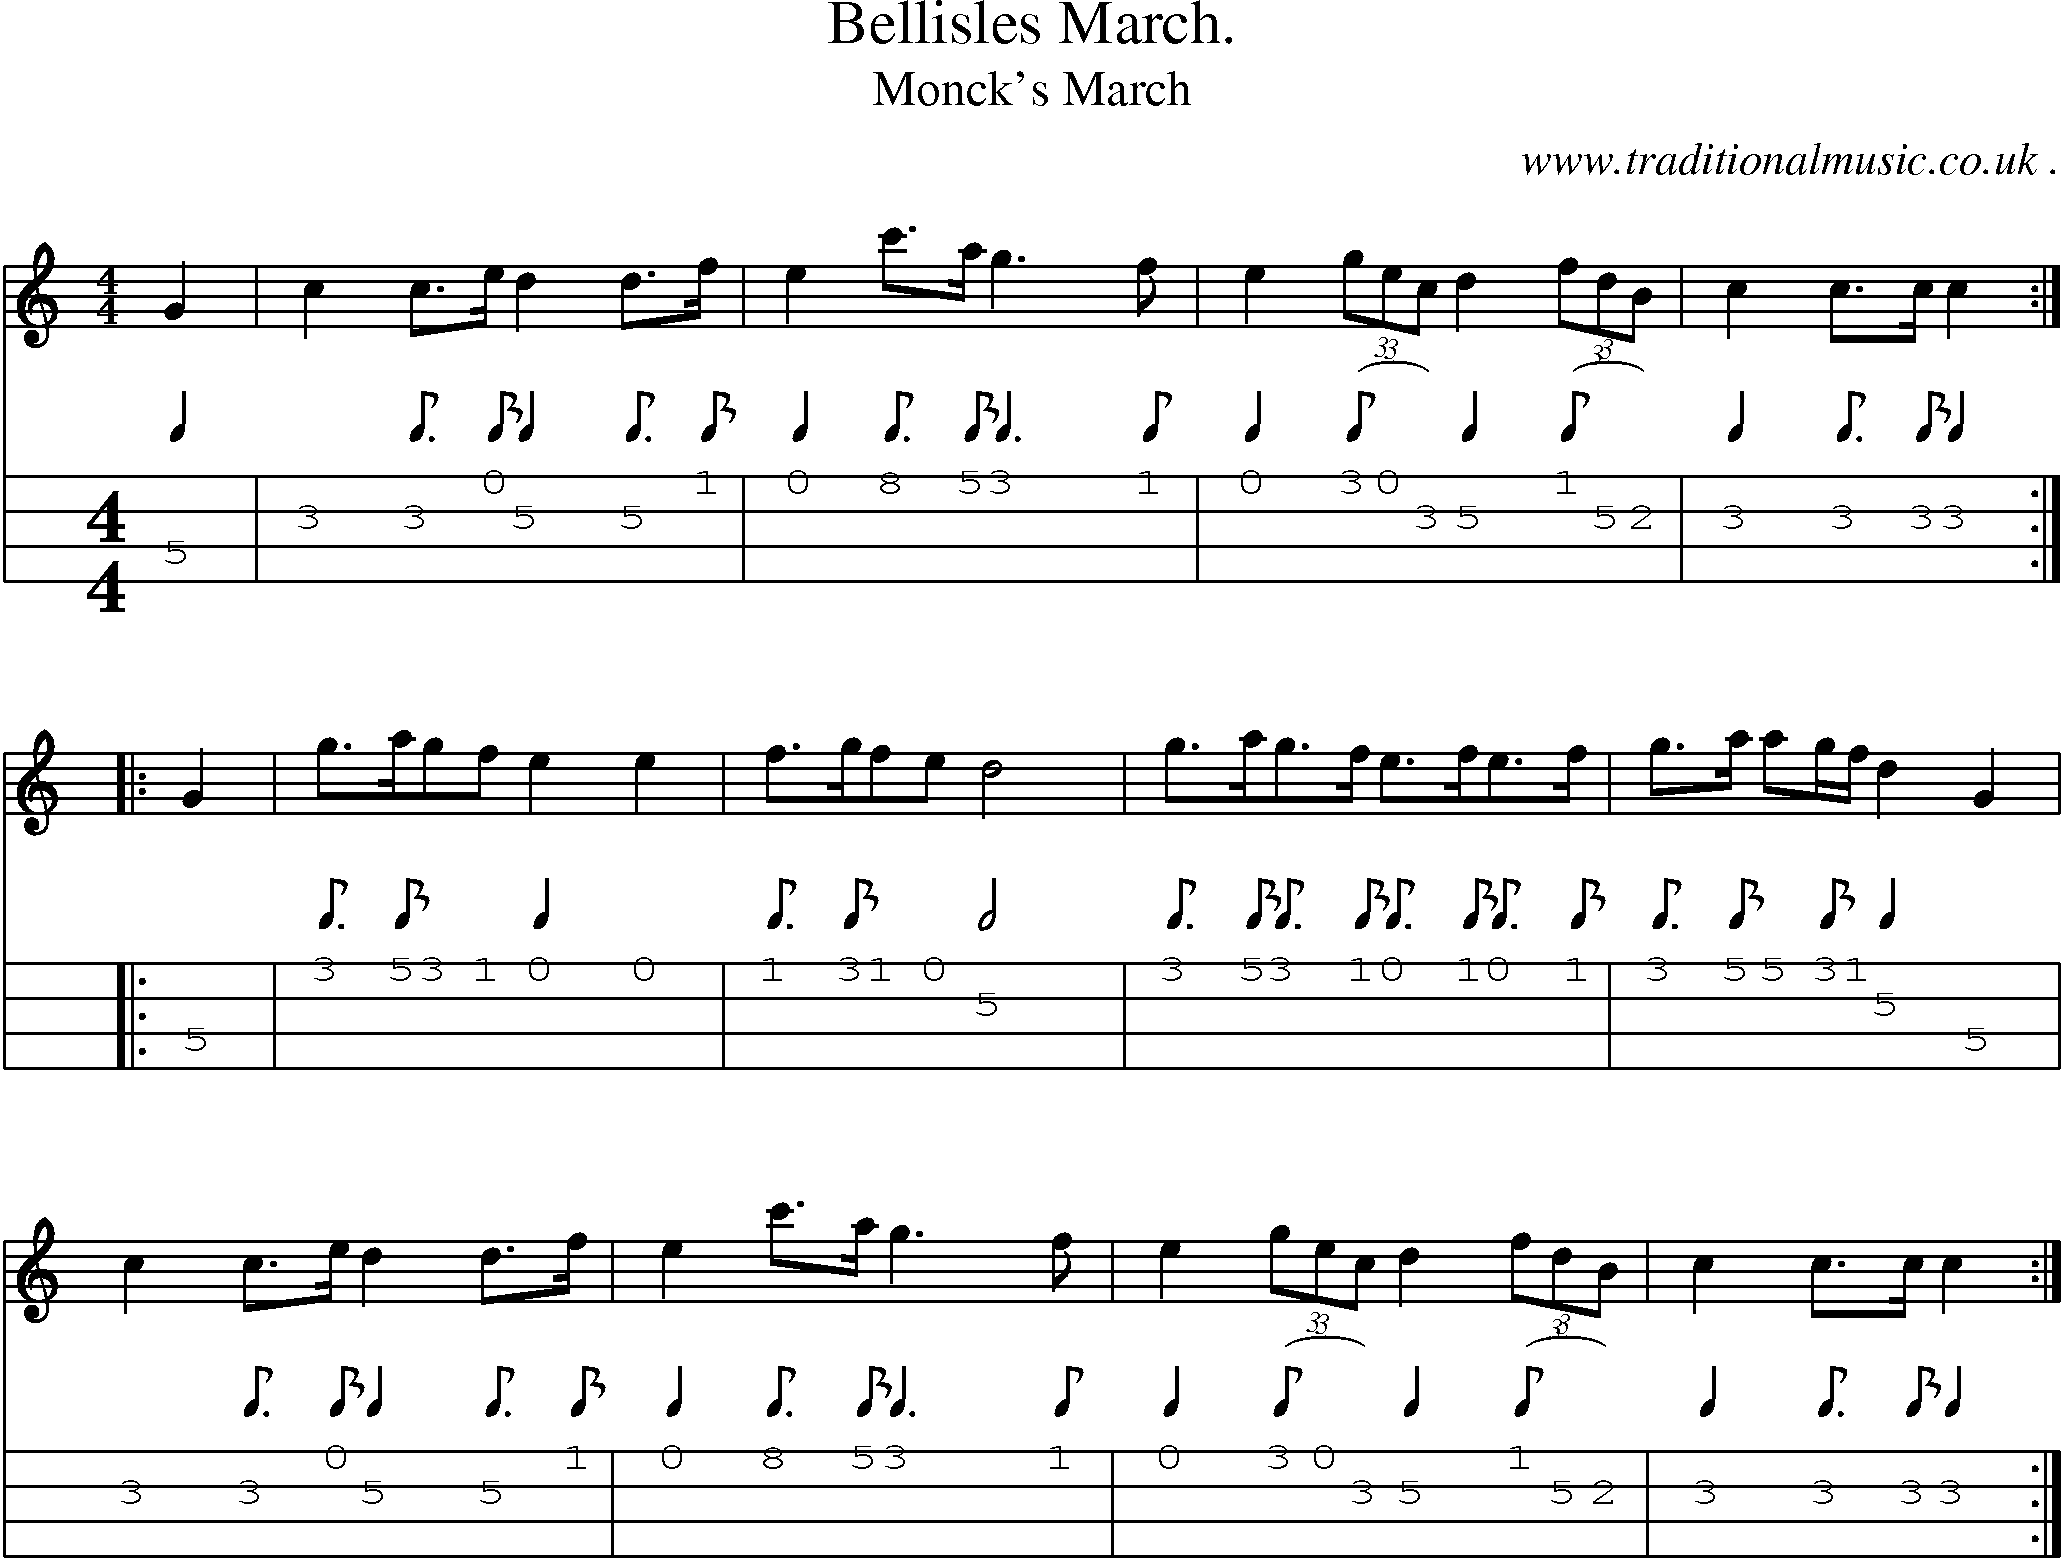 Sheet-Music and Mandolin Tabs for Bellisles March